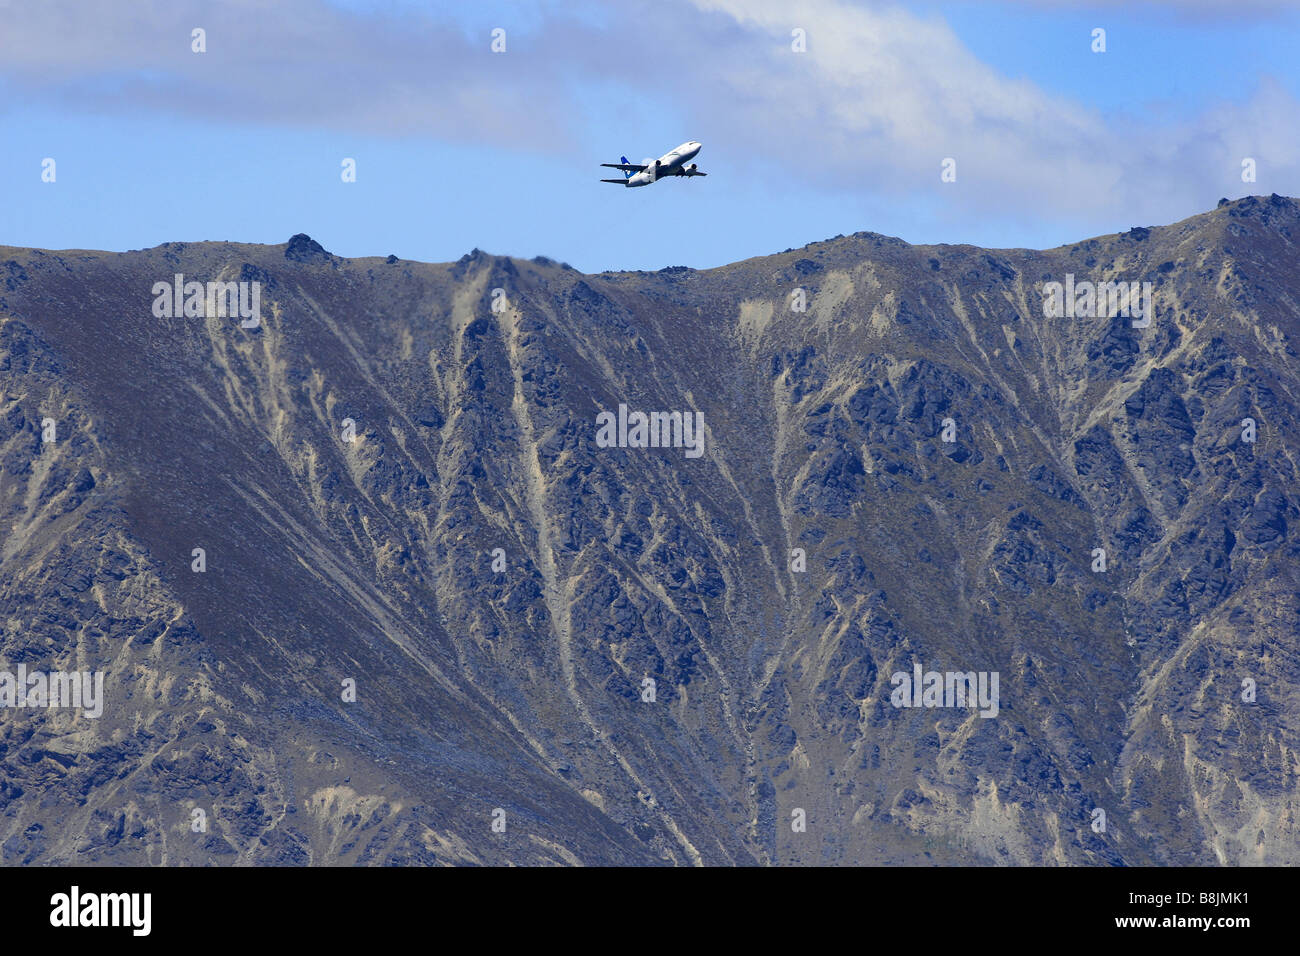 A plane takes off from Queenstown Airport, with The Remarkables in the background, New Zealand Stock Photo